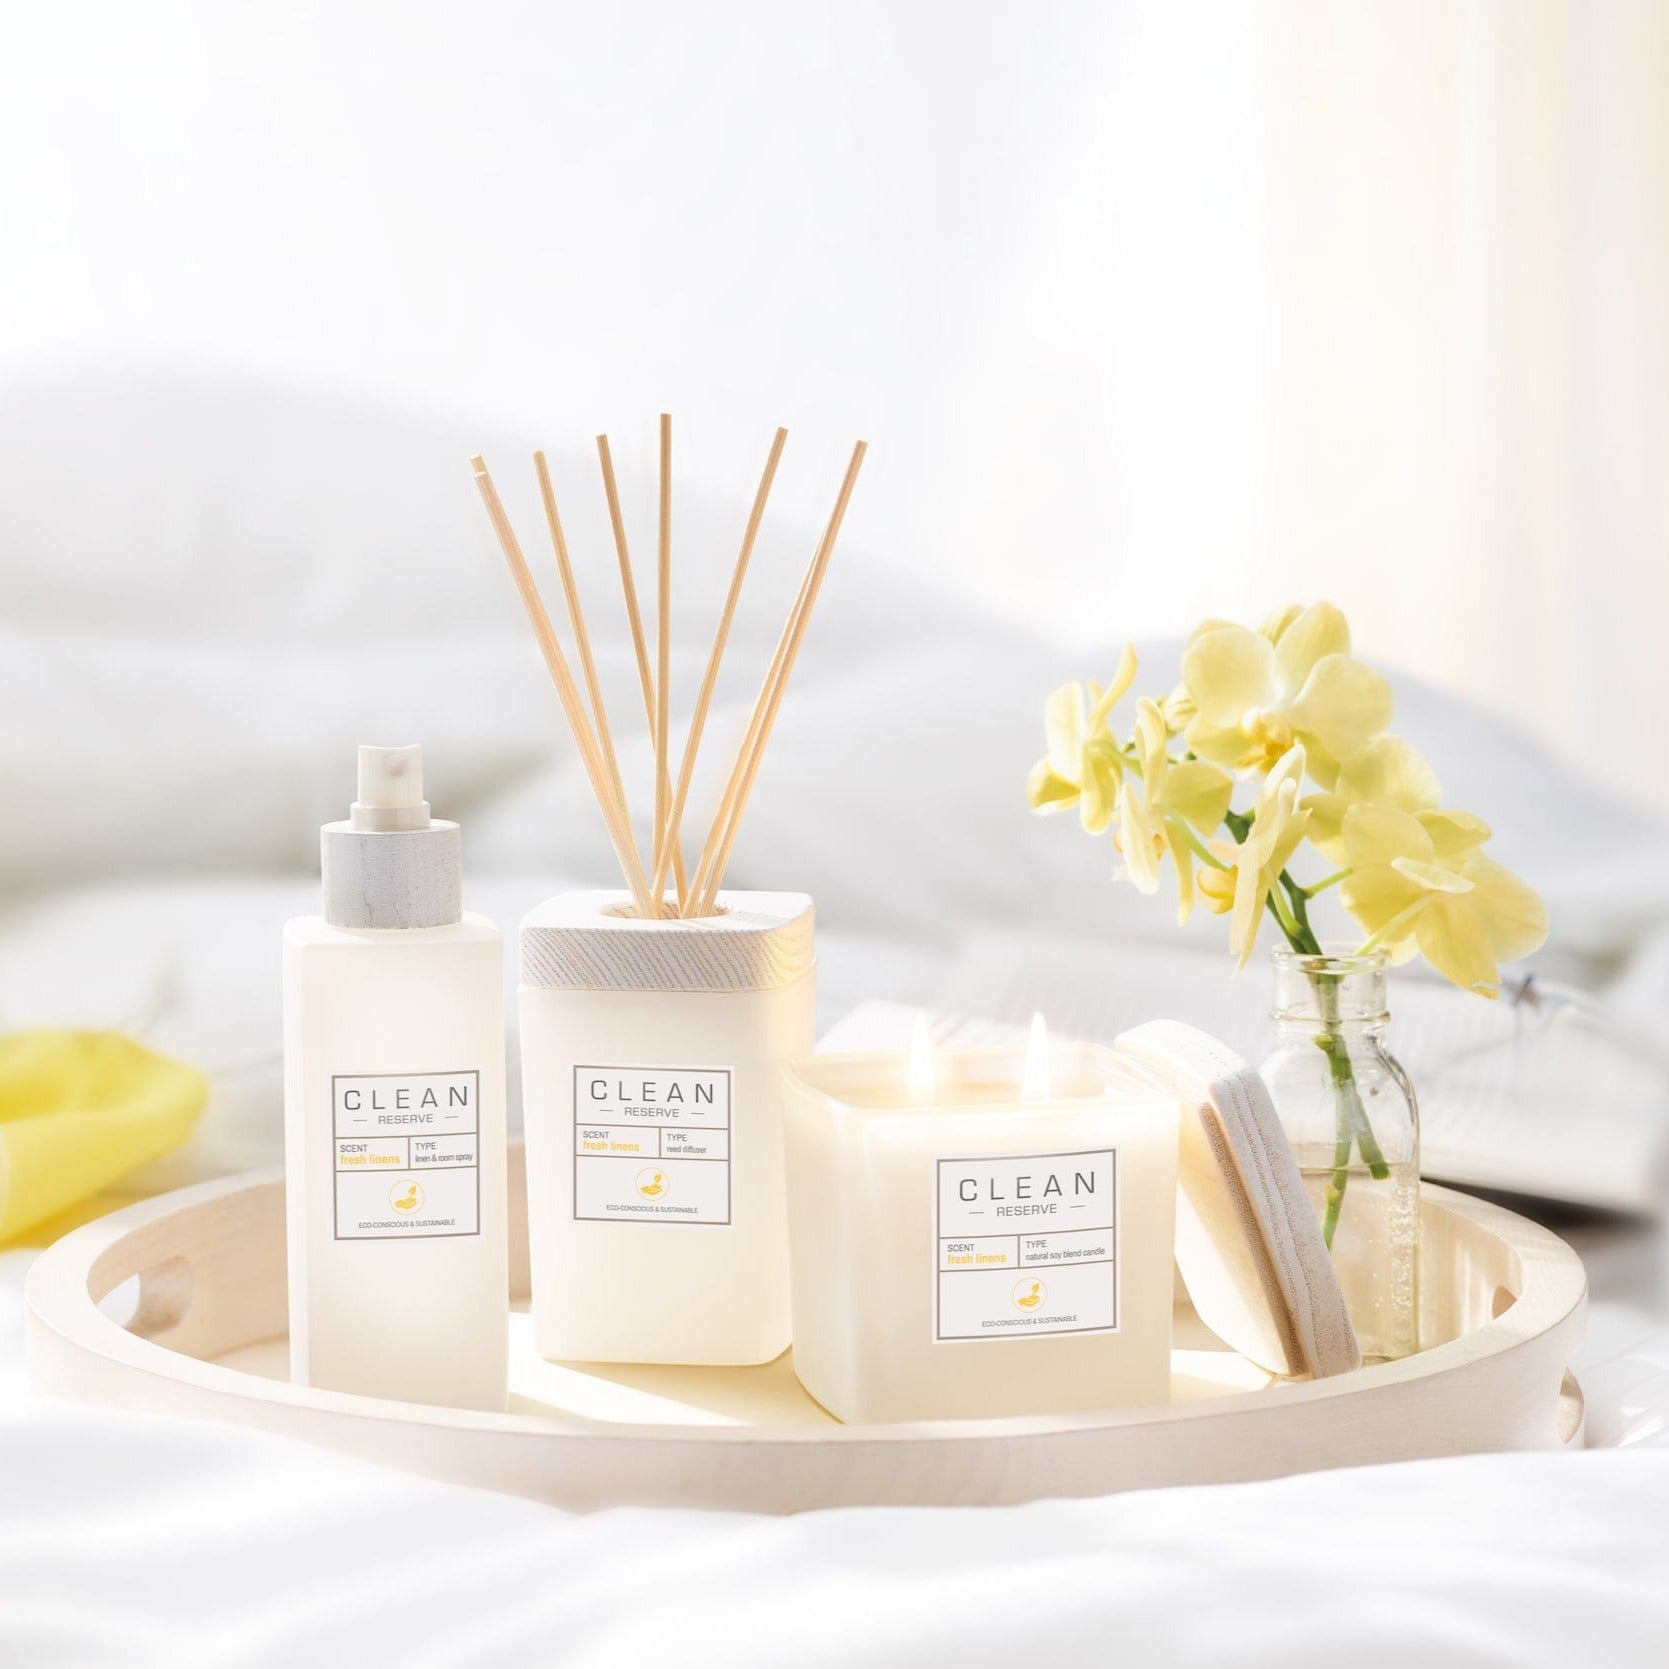 Southern Hospitality Candle - Nostalgic Fresh Linen, Sun-Dried Sheets,  Breezy Day Fragrance